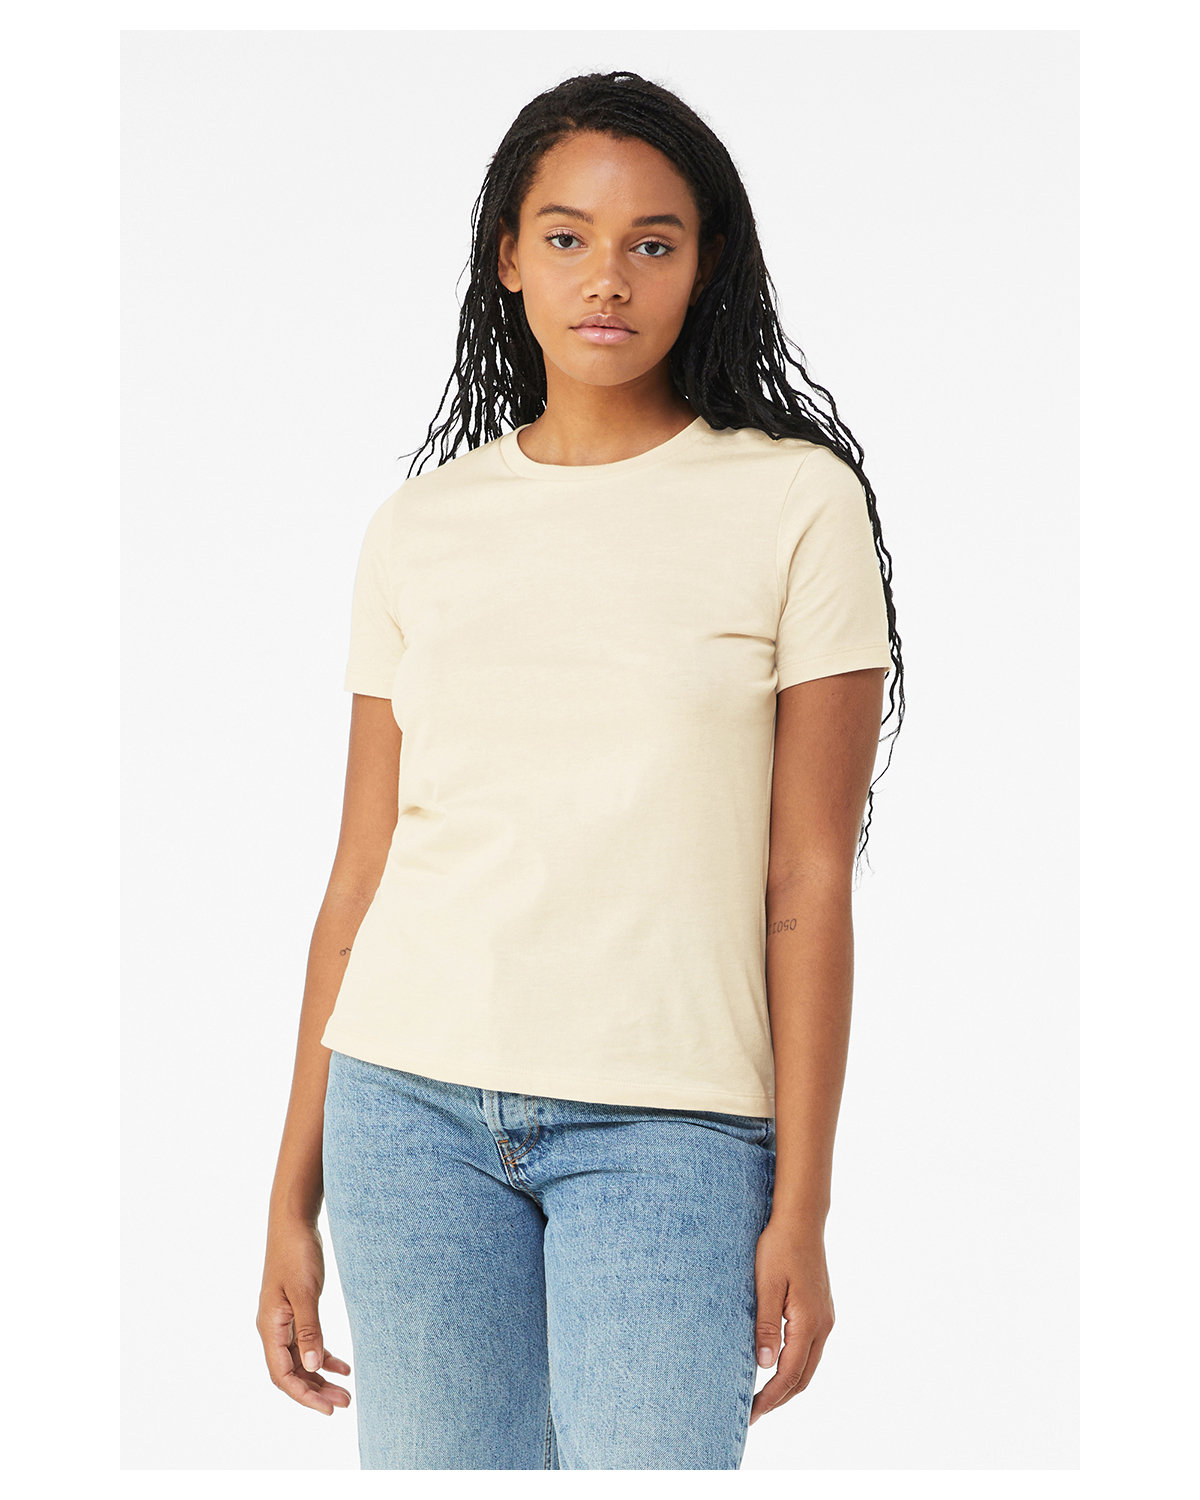 Bella + Canvas Ladies' Relaxed Jersey Short-Sleeve T-Shirt natural 